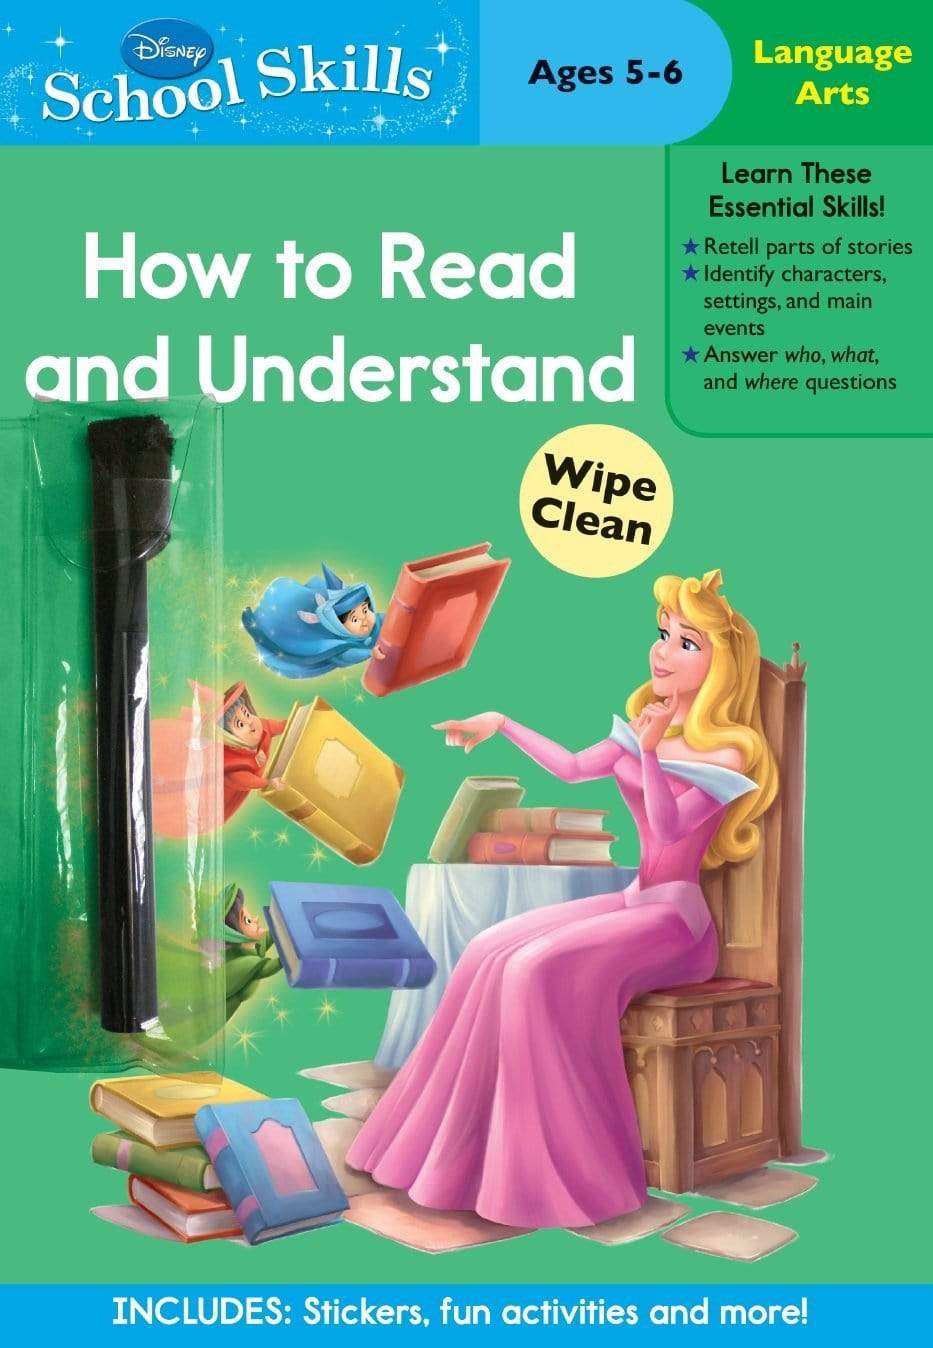 Disney School Skills: Princess How to Read and Understand